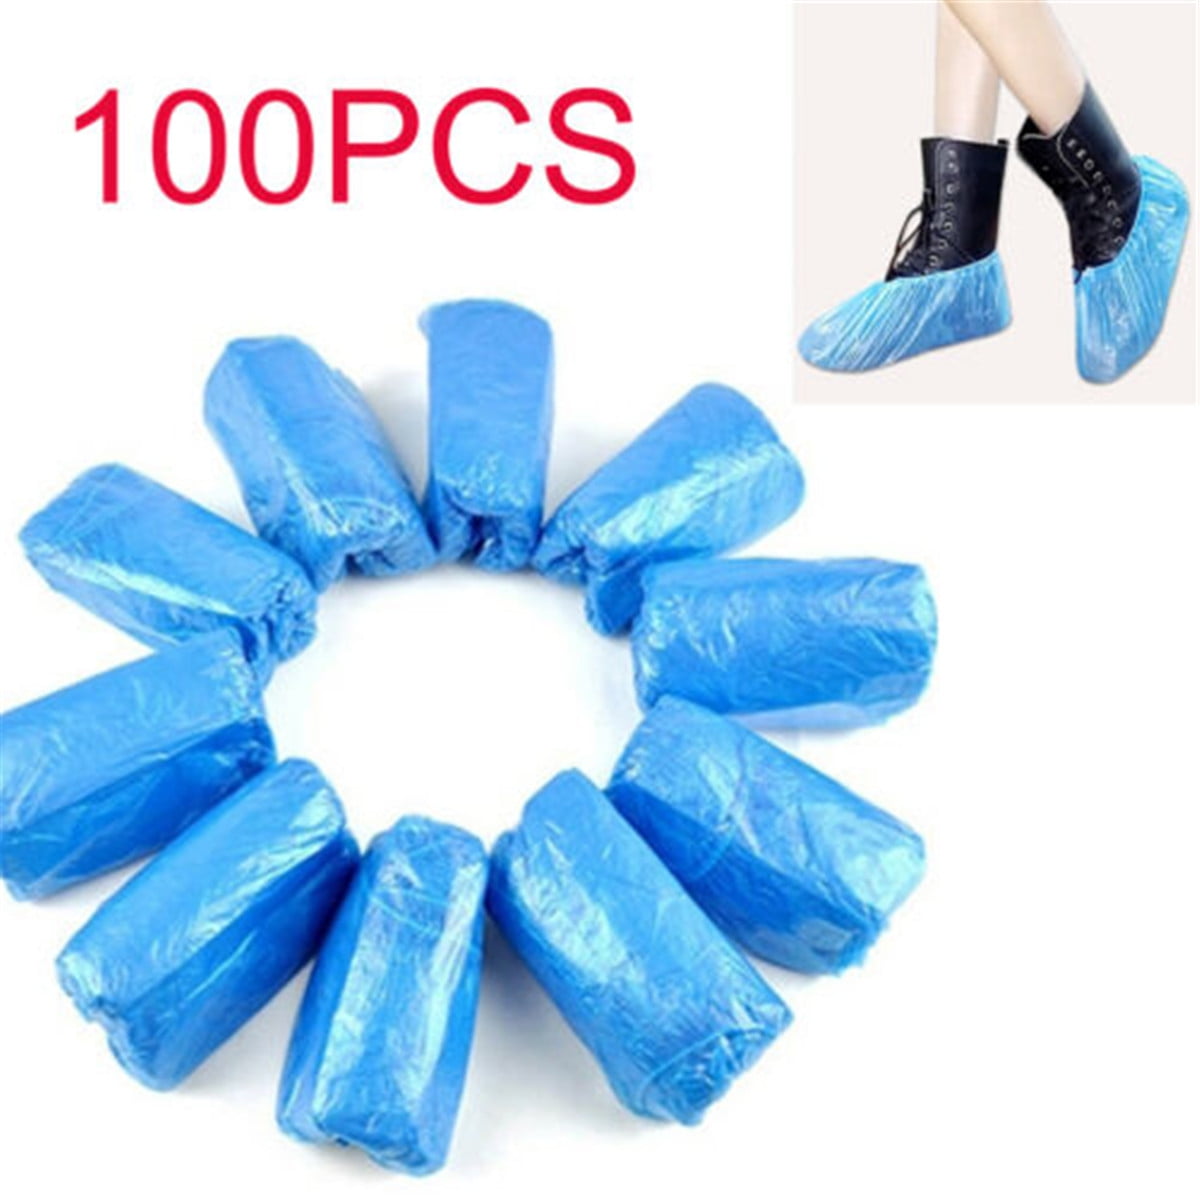 Disposable Shoe Covers Anti Slip Plastic Cleaning Overshoes Protective Cover